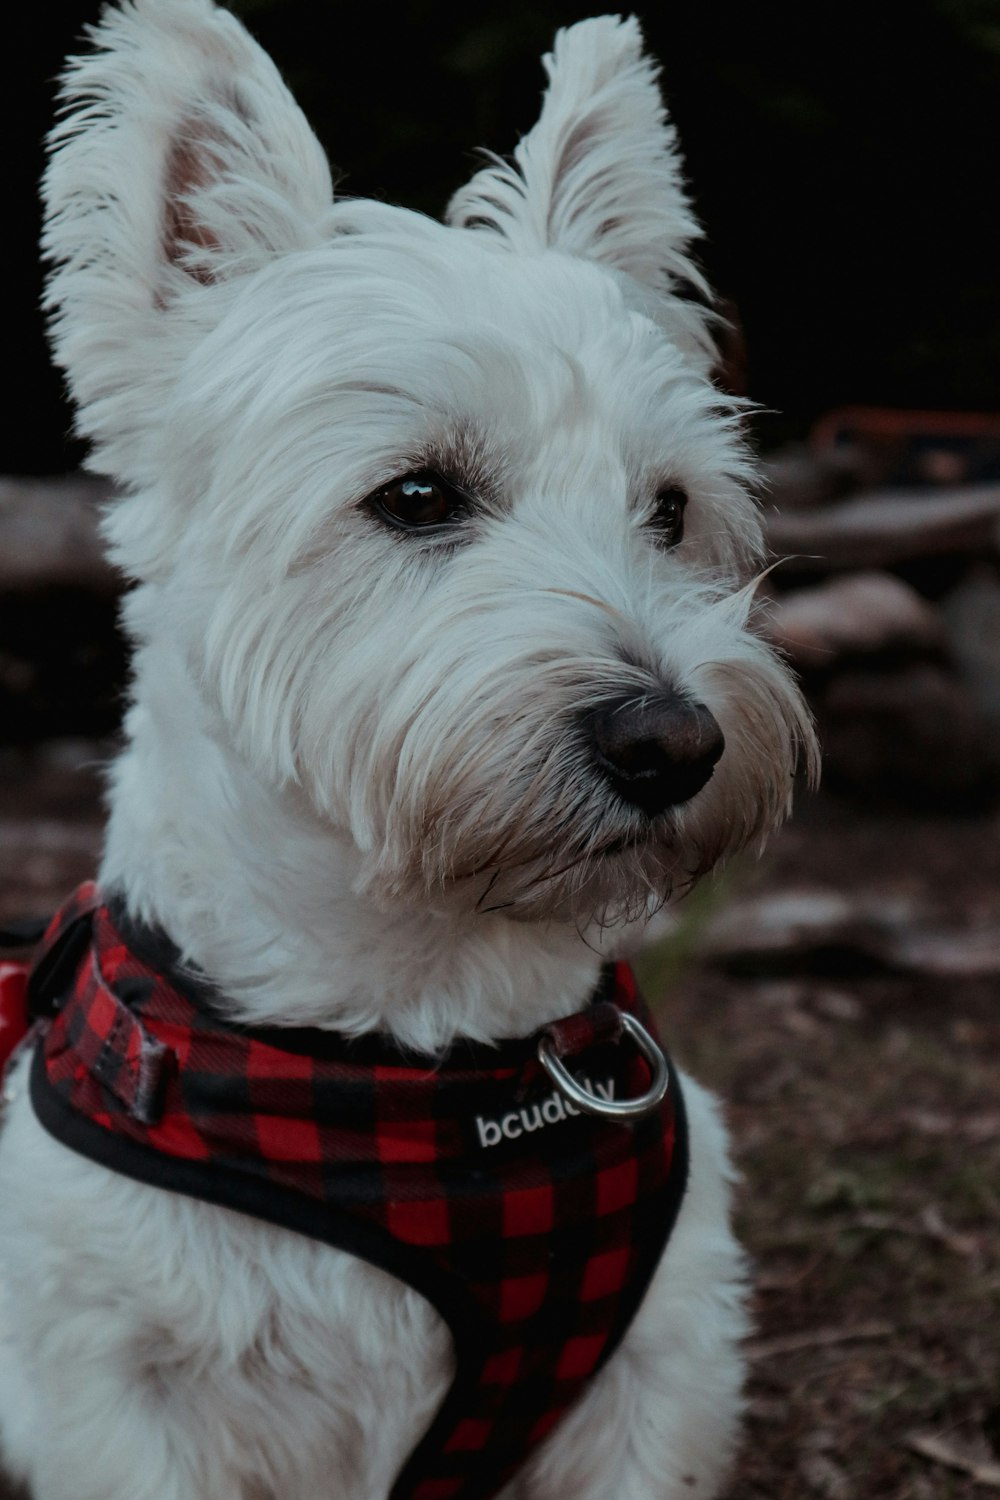 a small white dog wearing a red and black harness